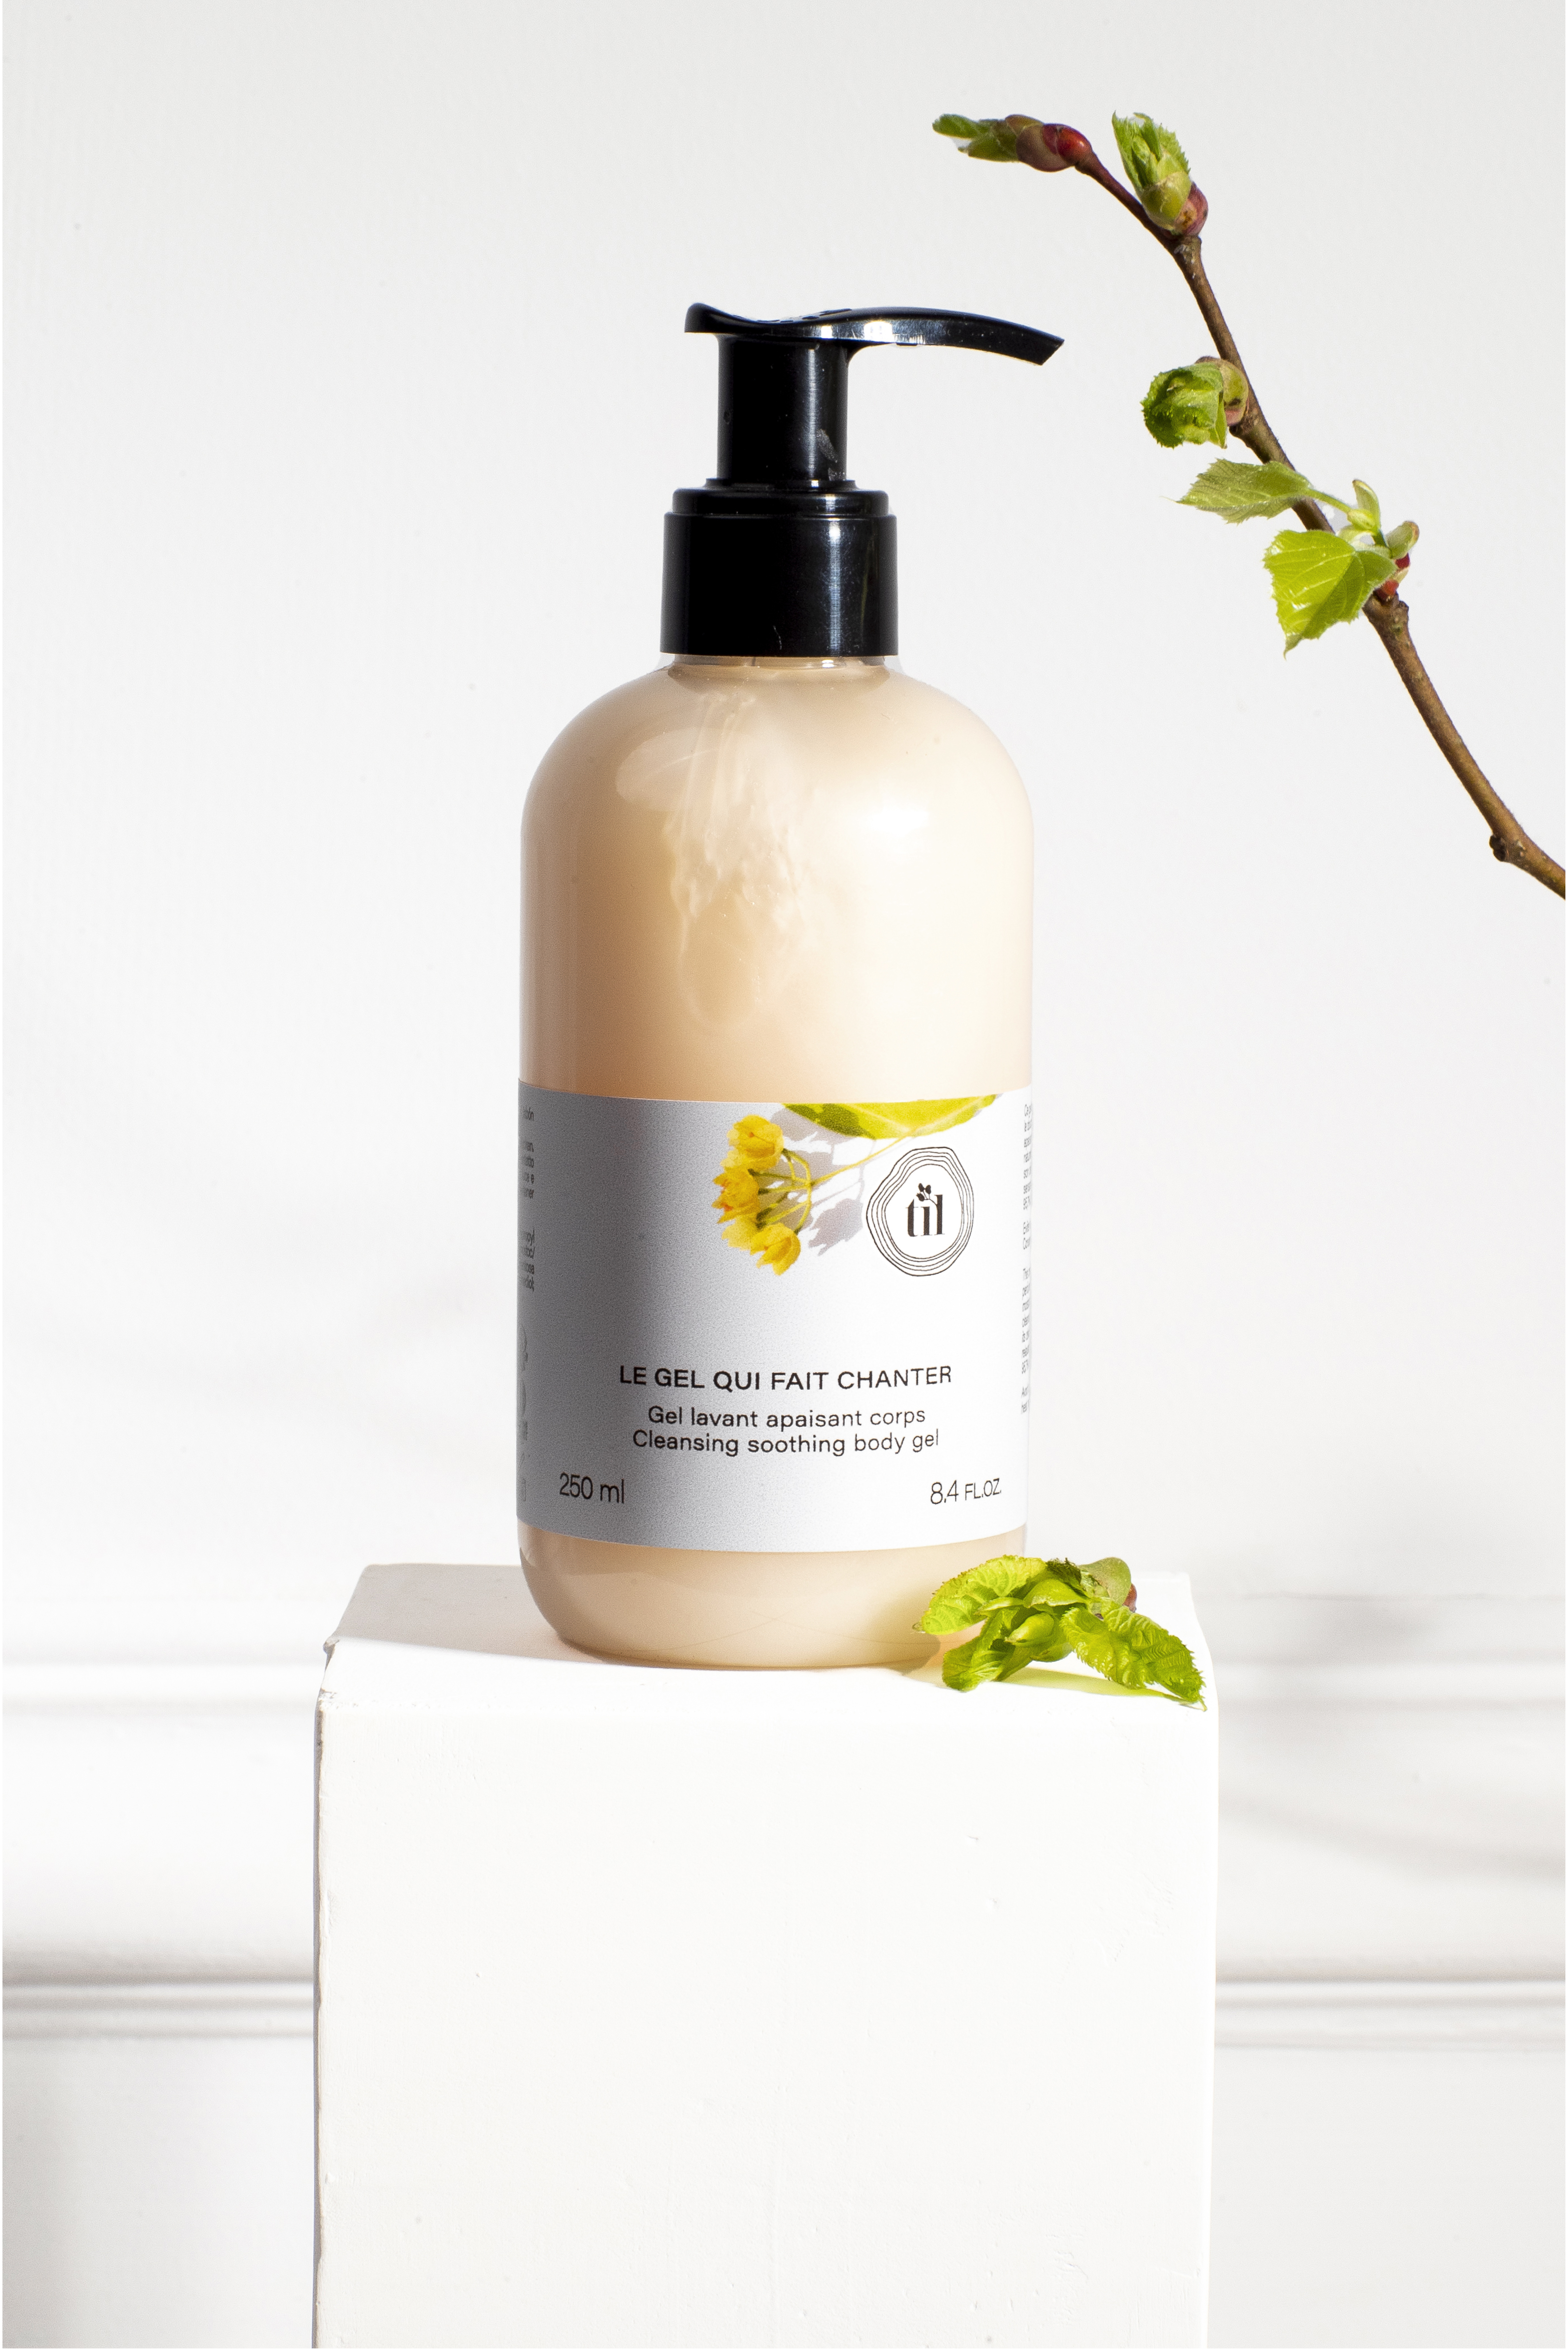 An ultra-silky shower gel with the delicate scent of linden blossom. It will transform your showers into moments of absolute relaxation and soothing.